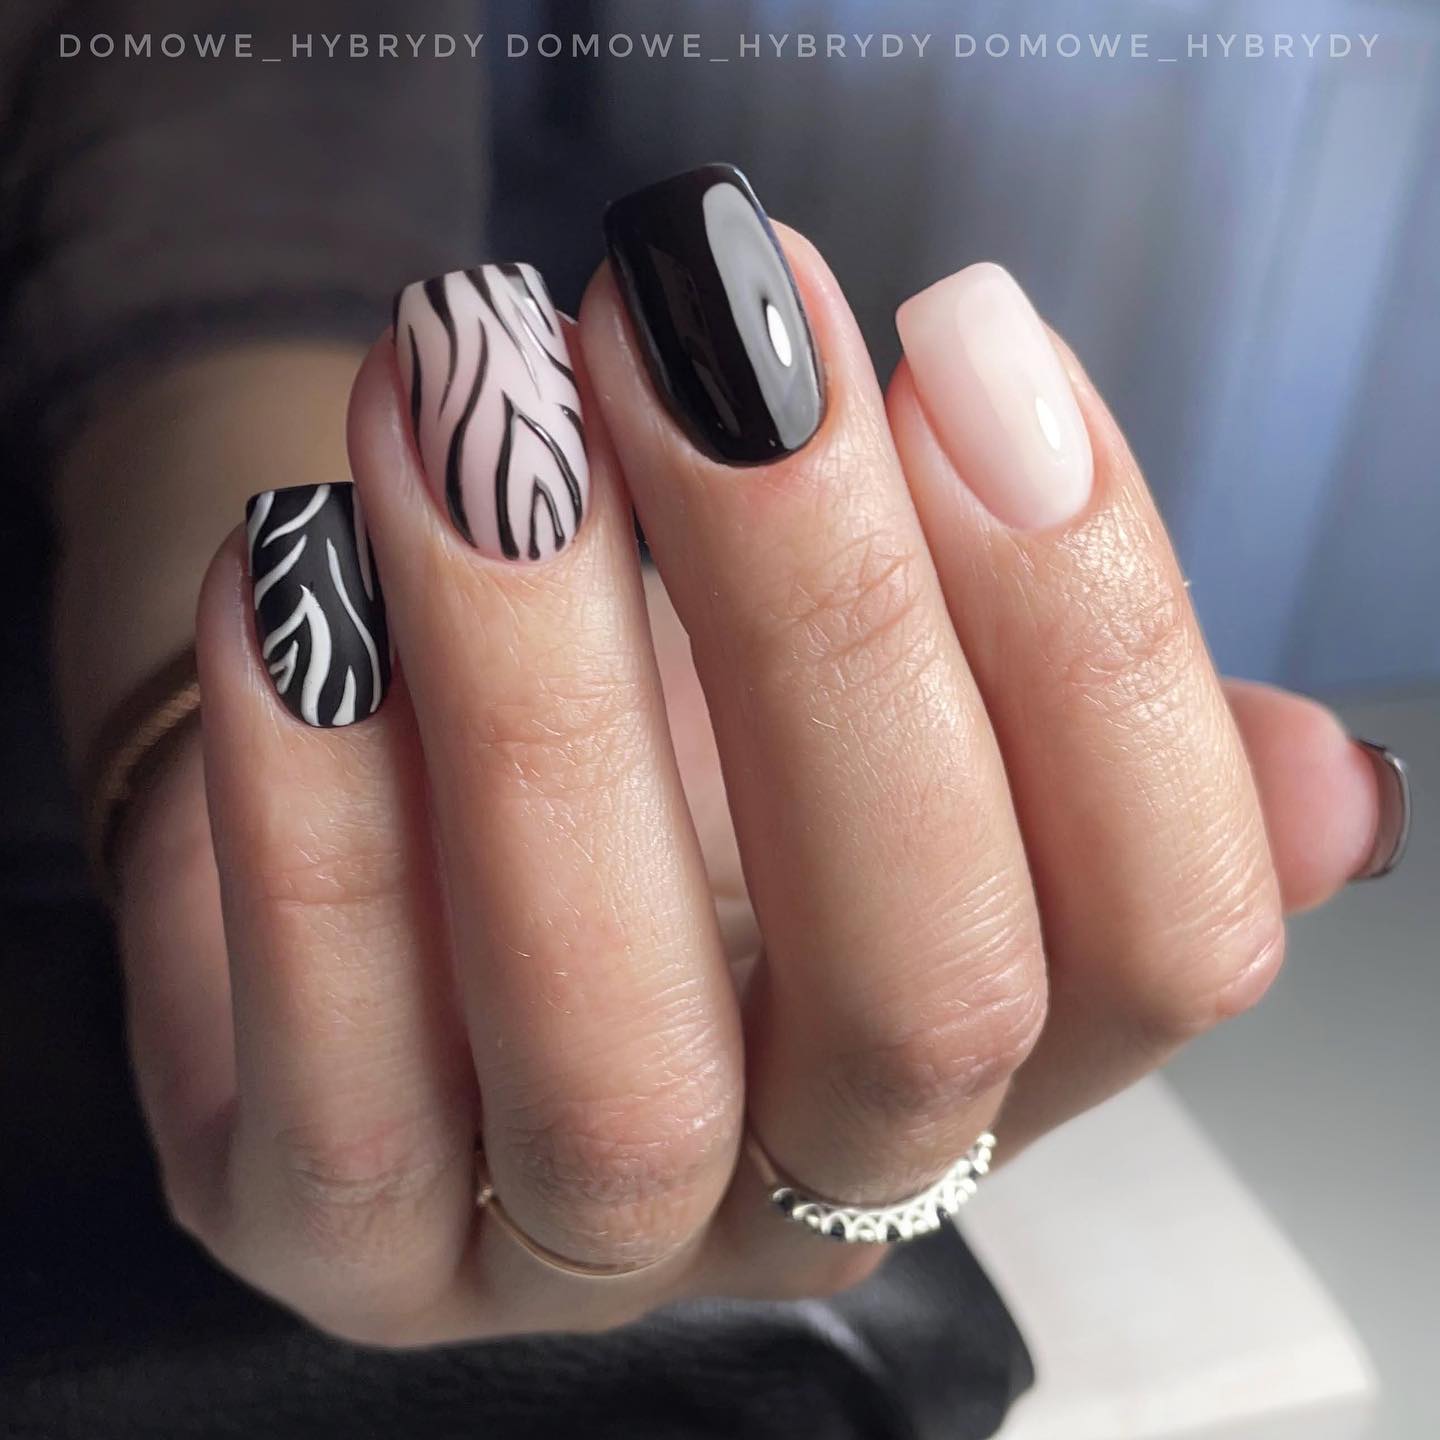 Zebra nail art is a design that uses black and white stripes to create a zebra-like pattern on the nails. Your short nails will be taken to a different level with zebra accent nails.